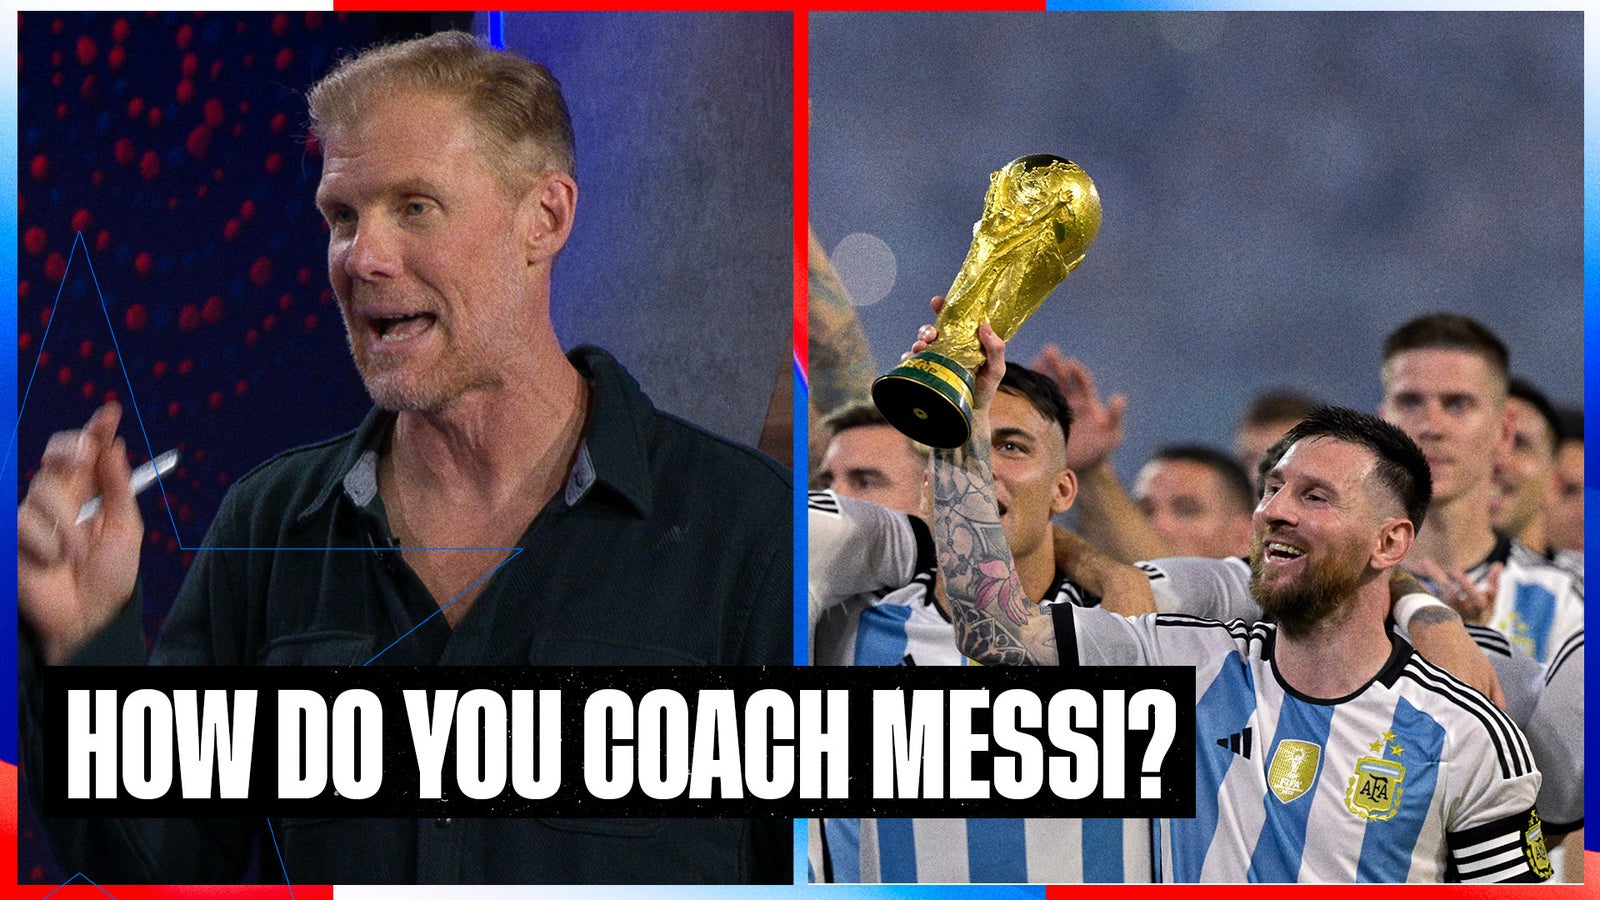 Messi's move to the MLS: What is the best coaching tactic? | SOTU